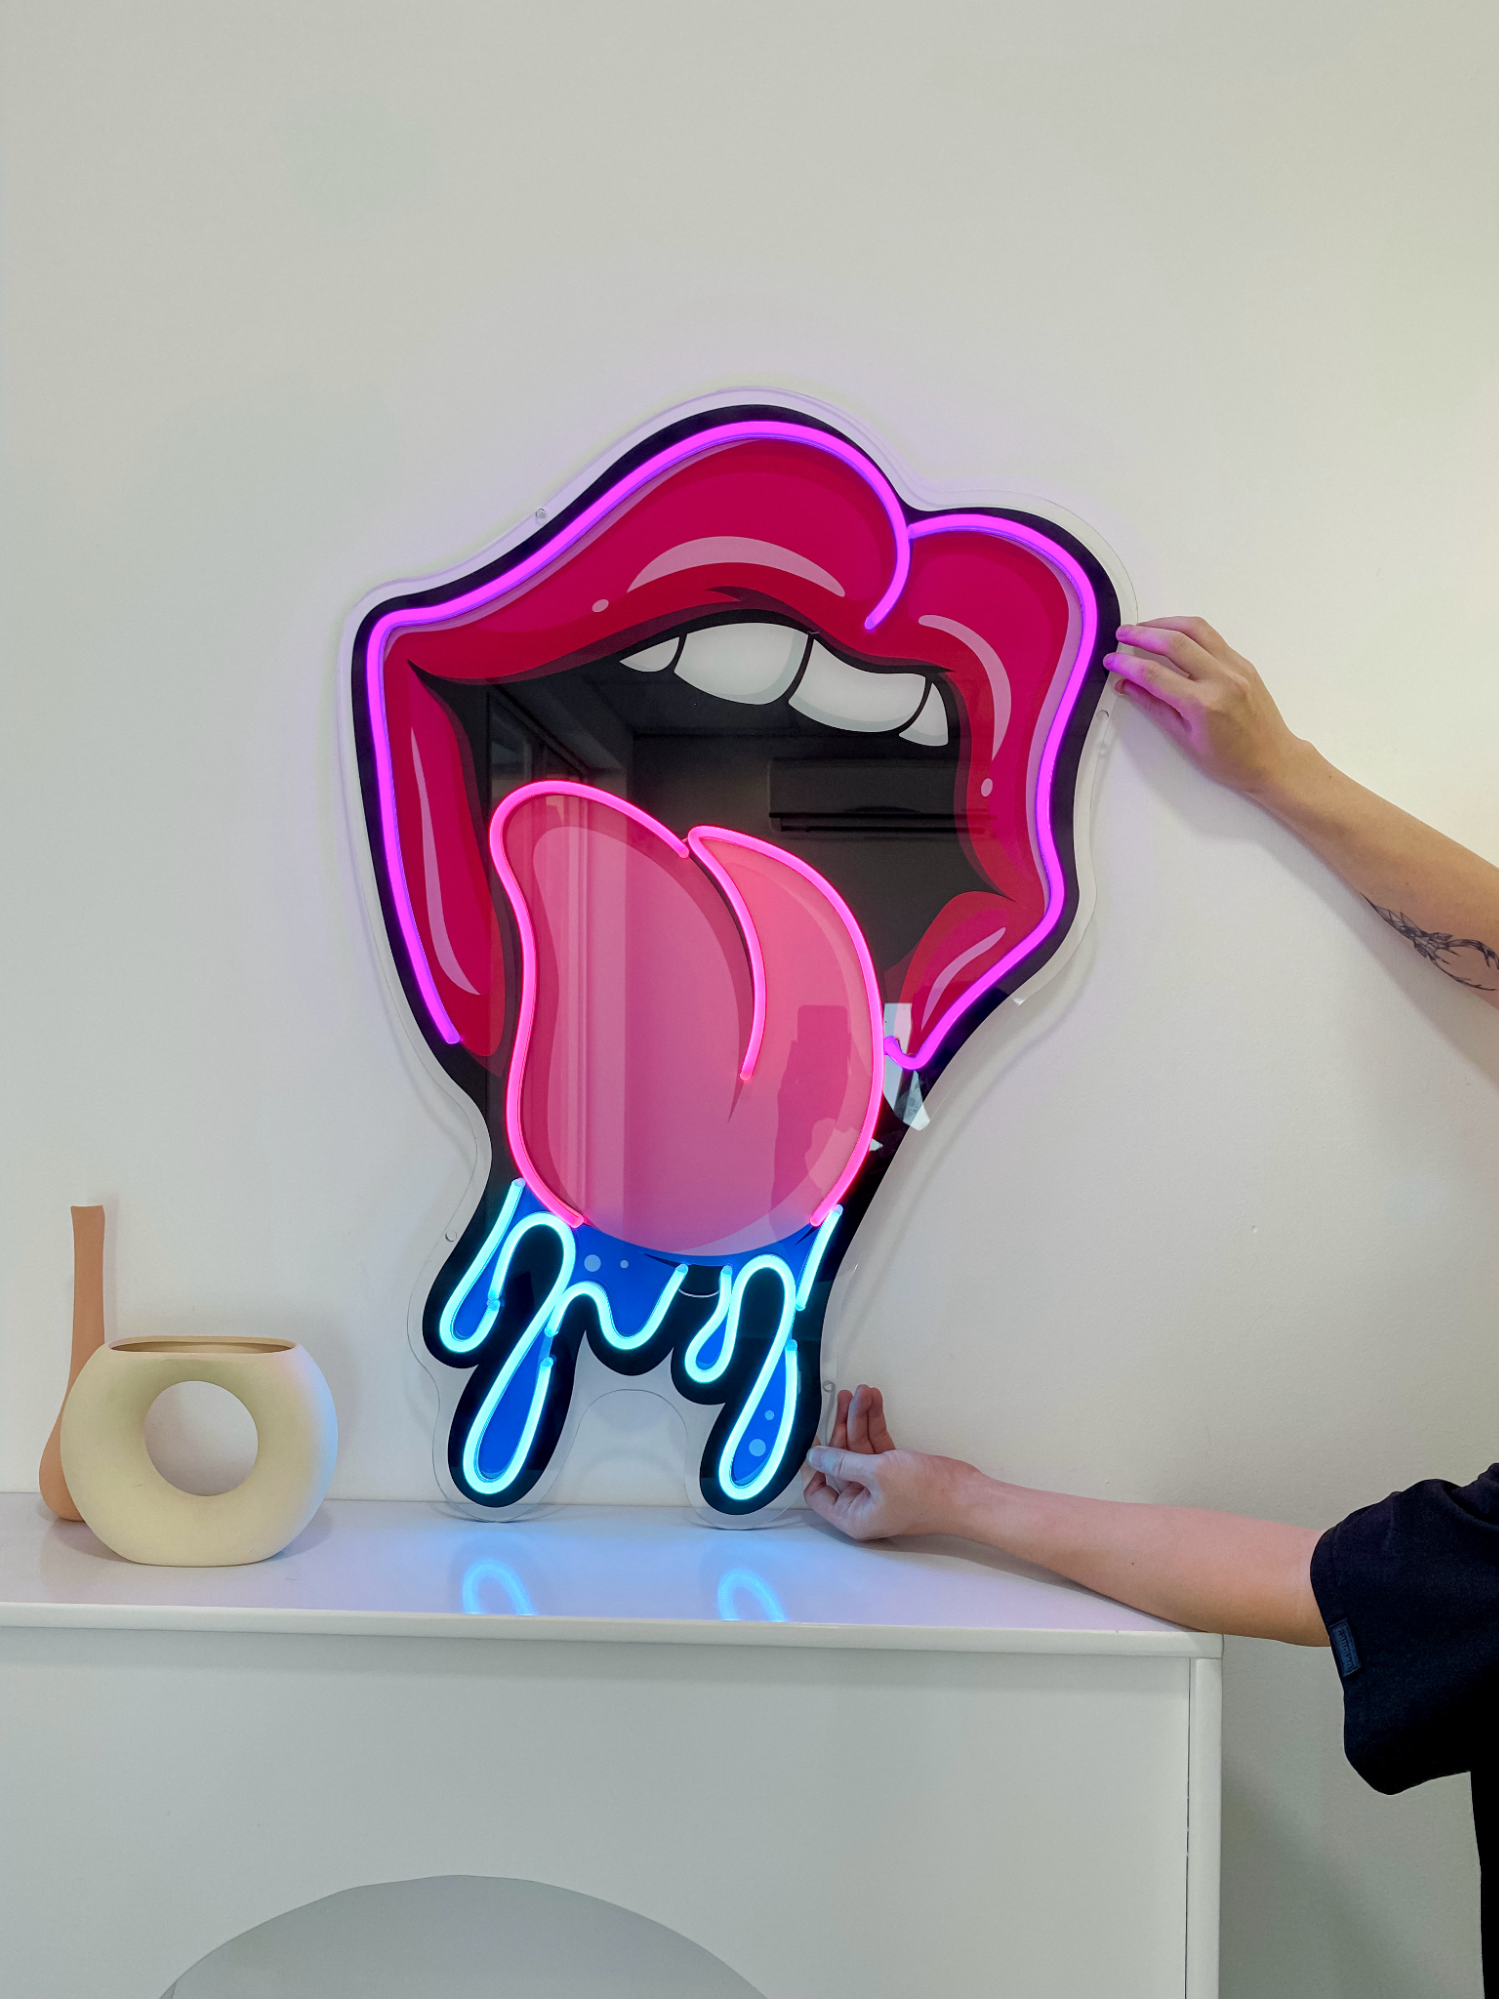 Neon sign idea for place